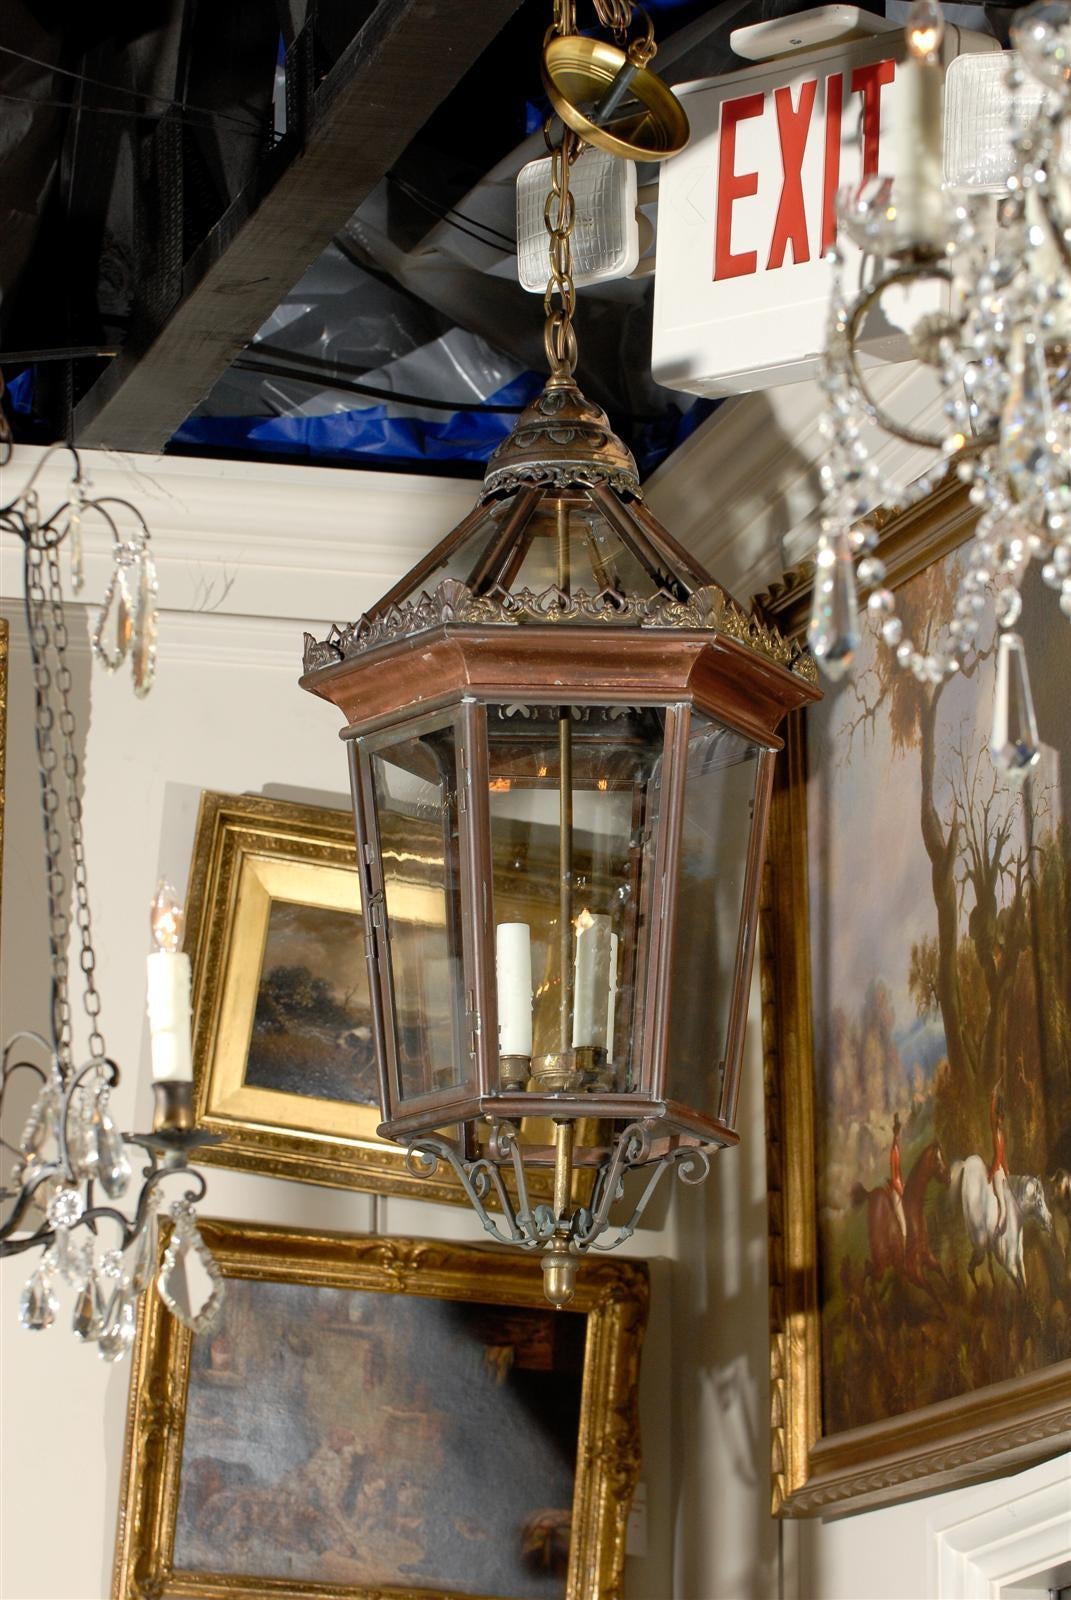 Pair of Copper 19th century lanterns with new wiring and wax sleeves.